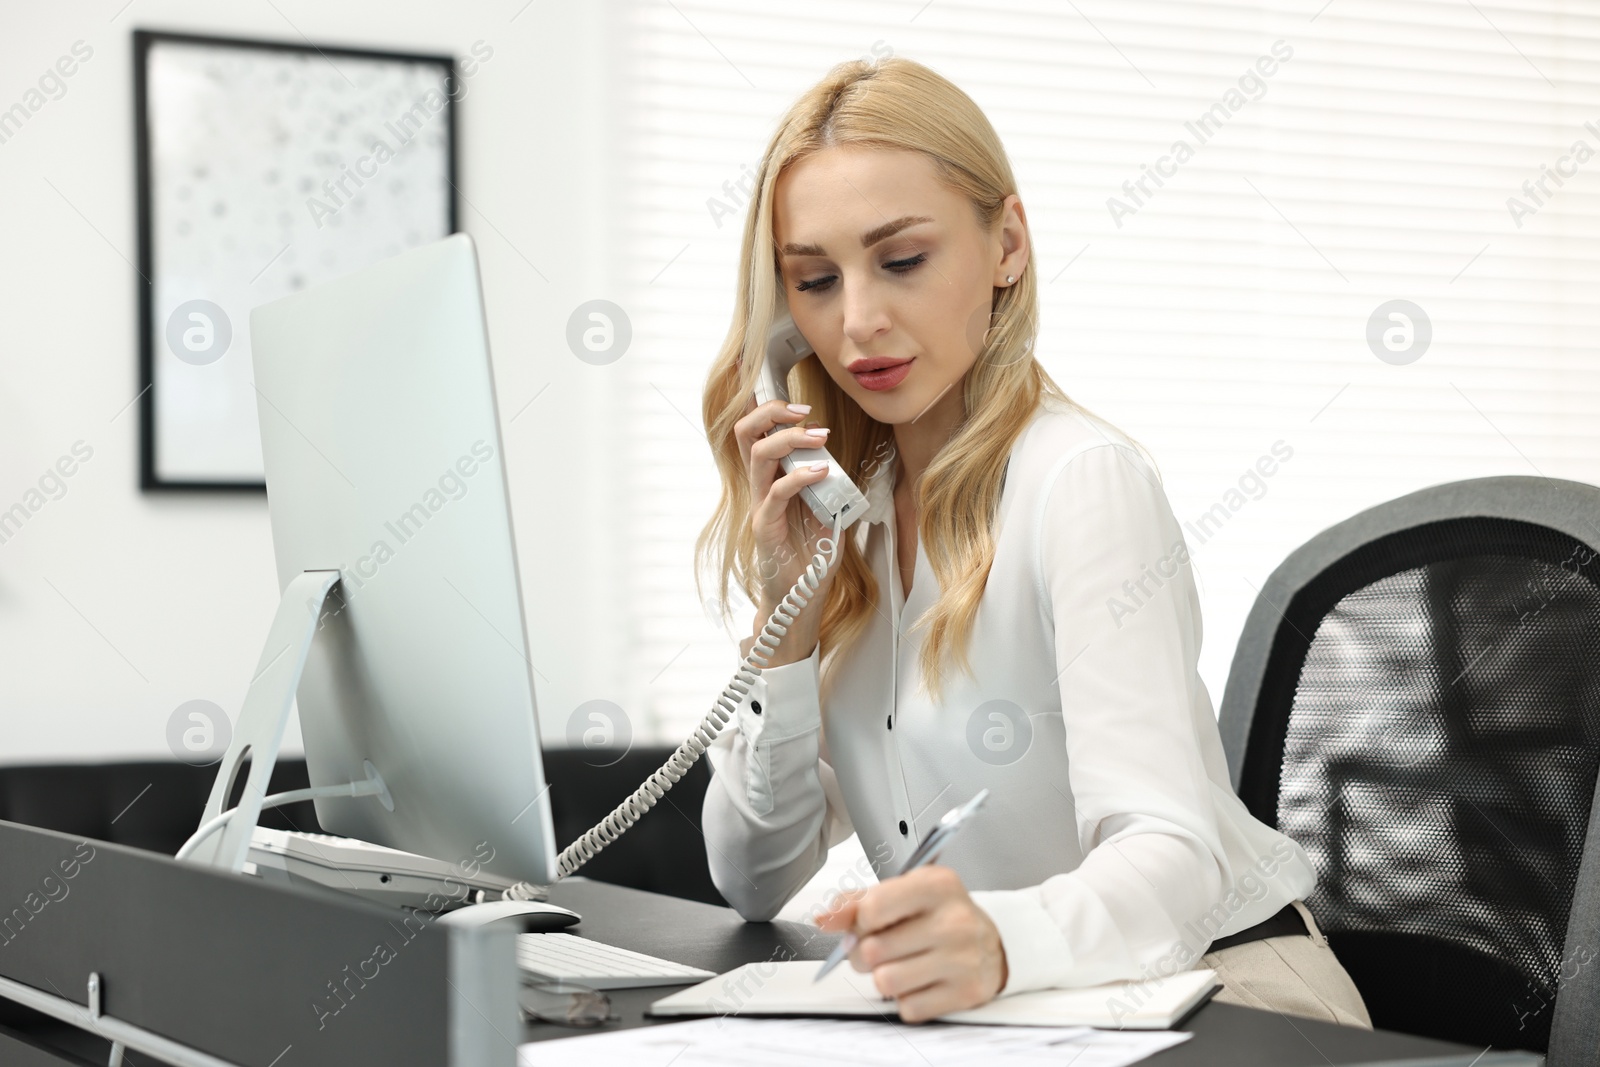 Photo of Secretary talking on phone and taking notes at table in office